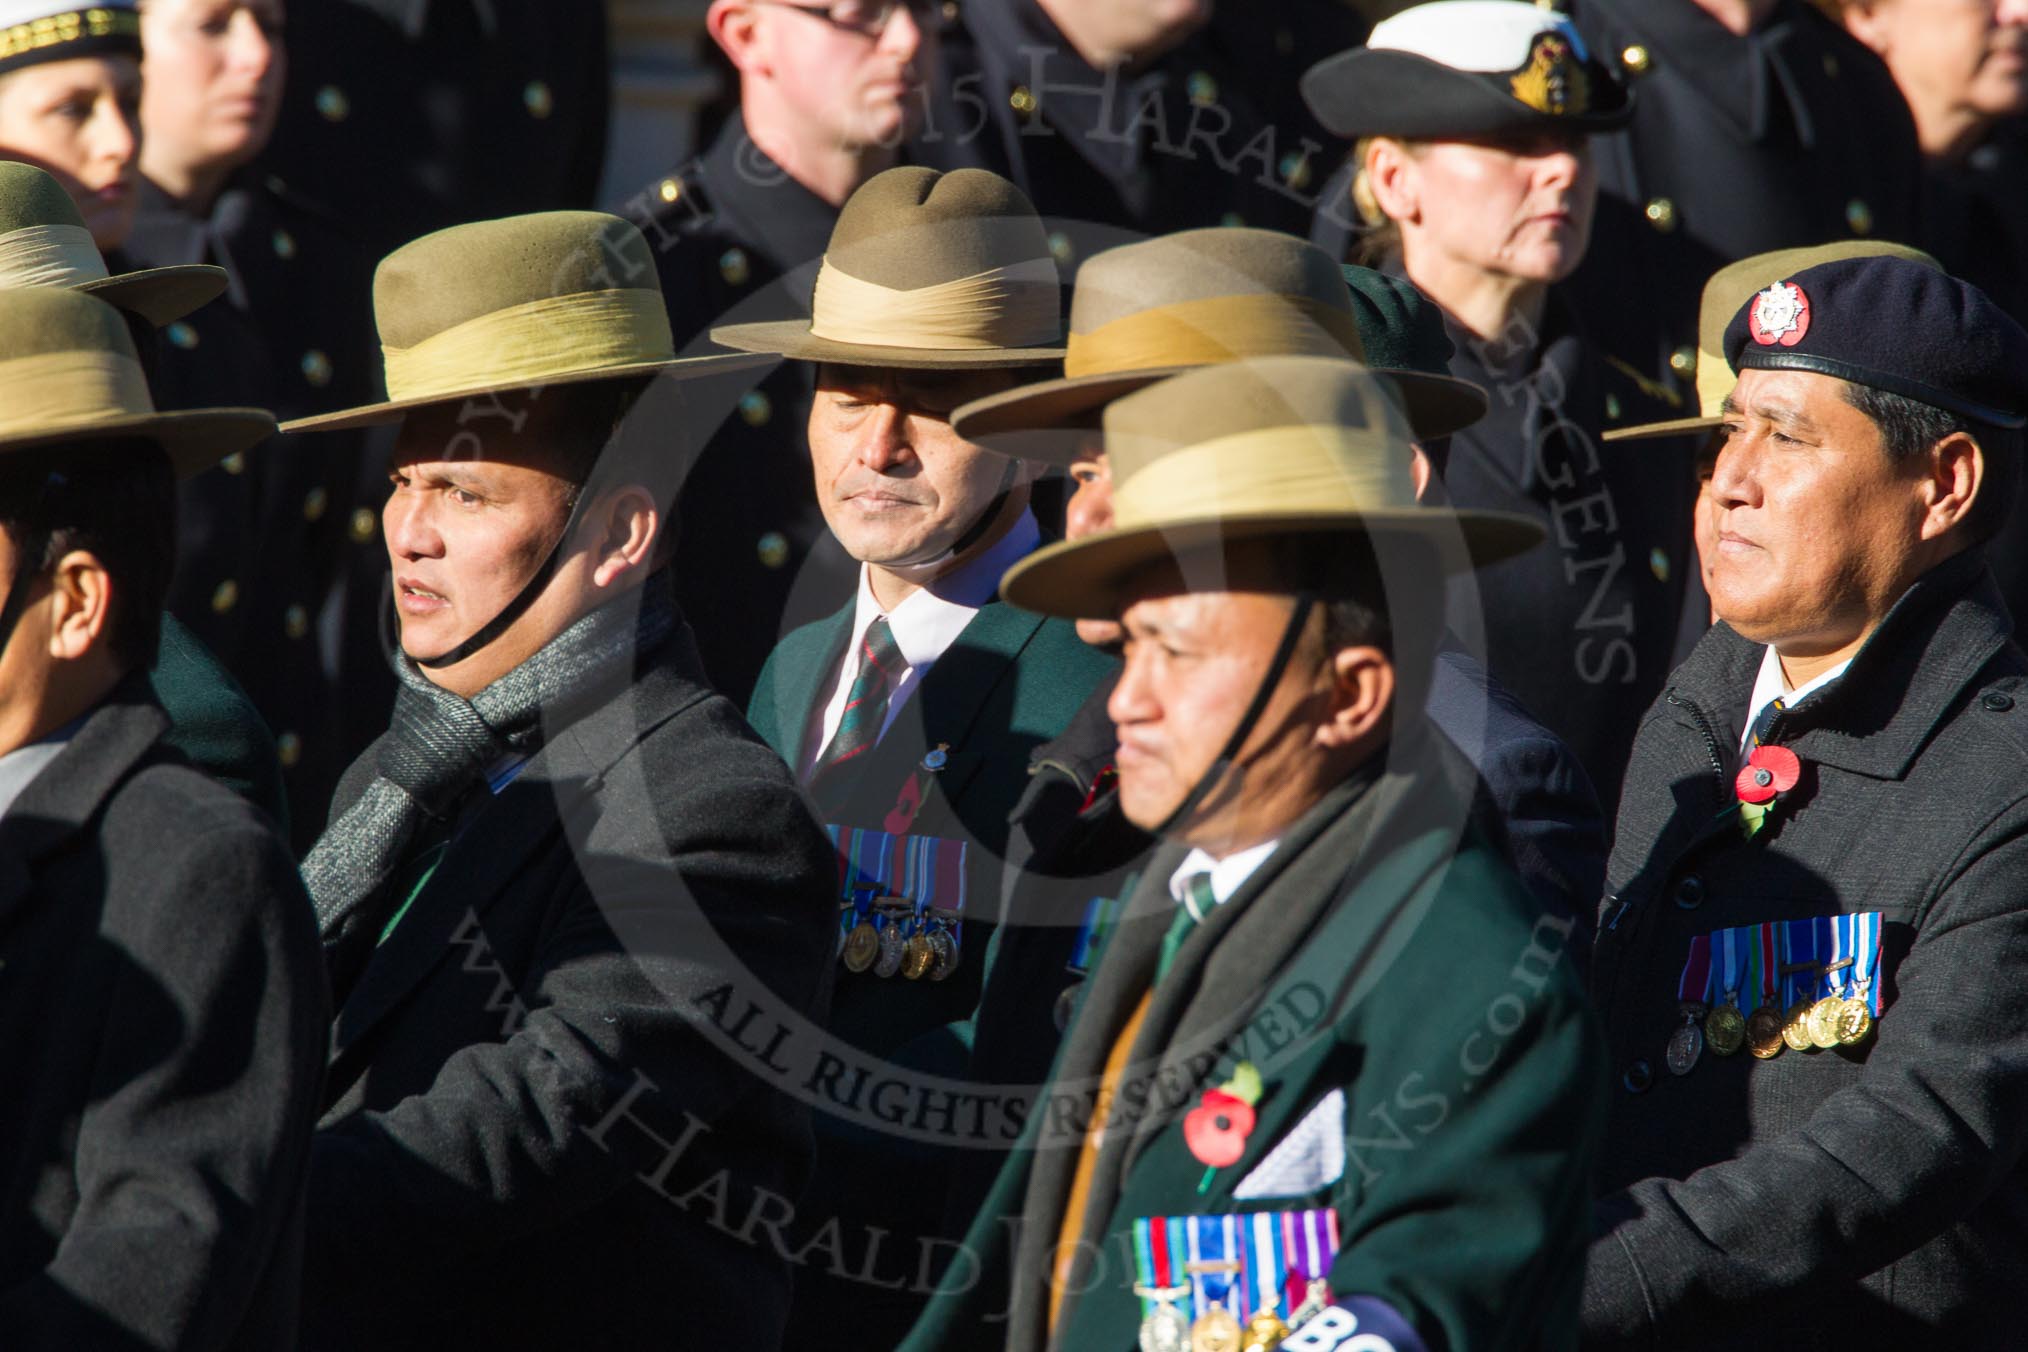 Remembrance Sunday Cenotaph March Past 2013: D2 - British Gurkha Welfare Association..
Press stand opposite the Foreign Office building, Whitehall, London SW1,
London,
Greater London,
United Kingdom,
on 10 November 2013 at 11:38, image #37